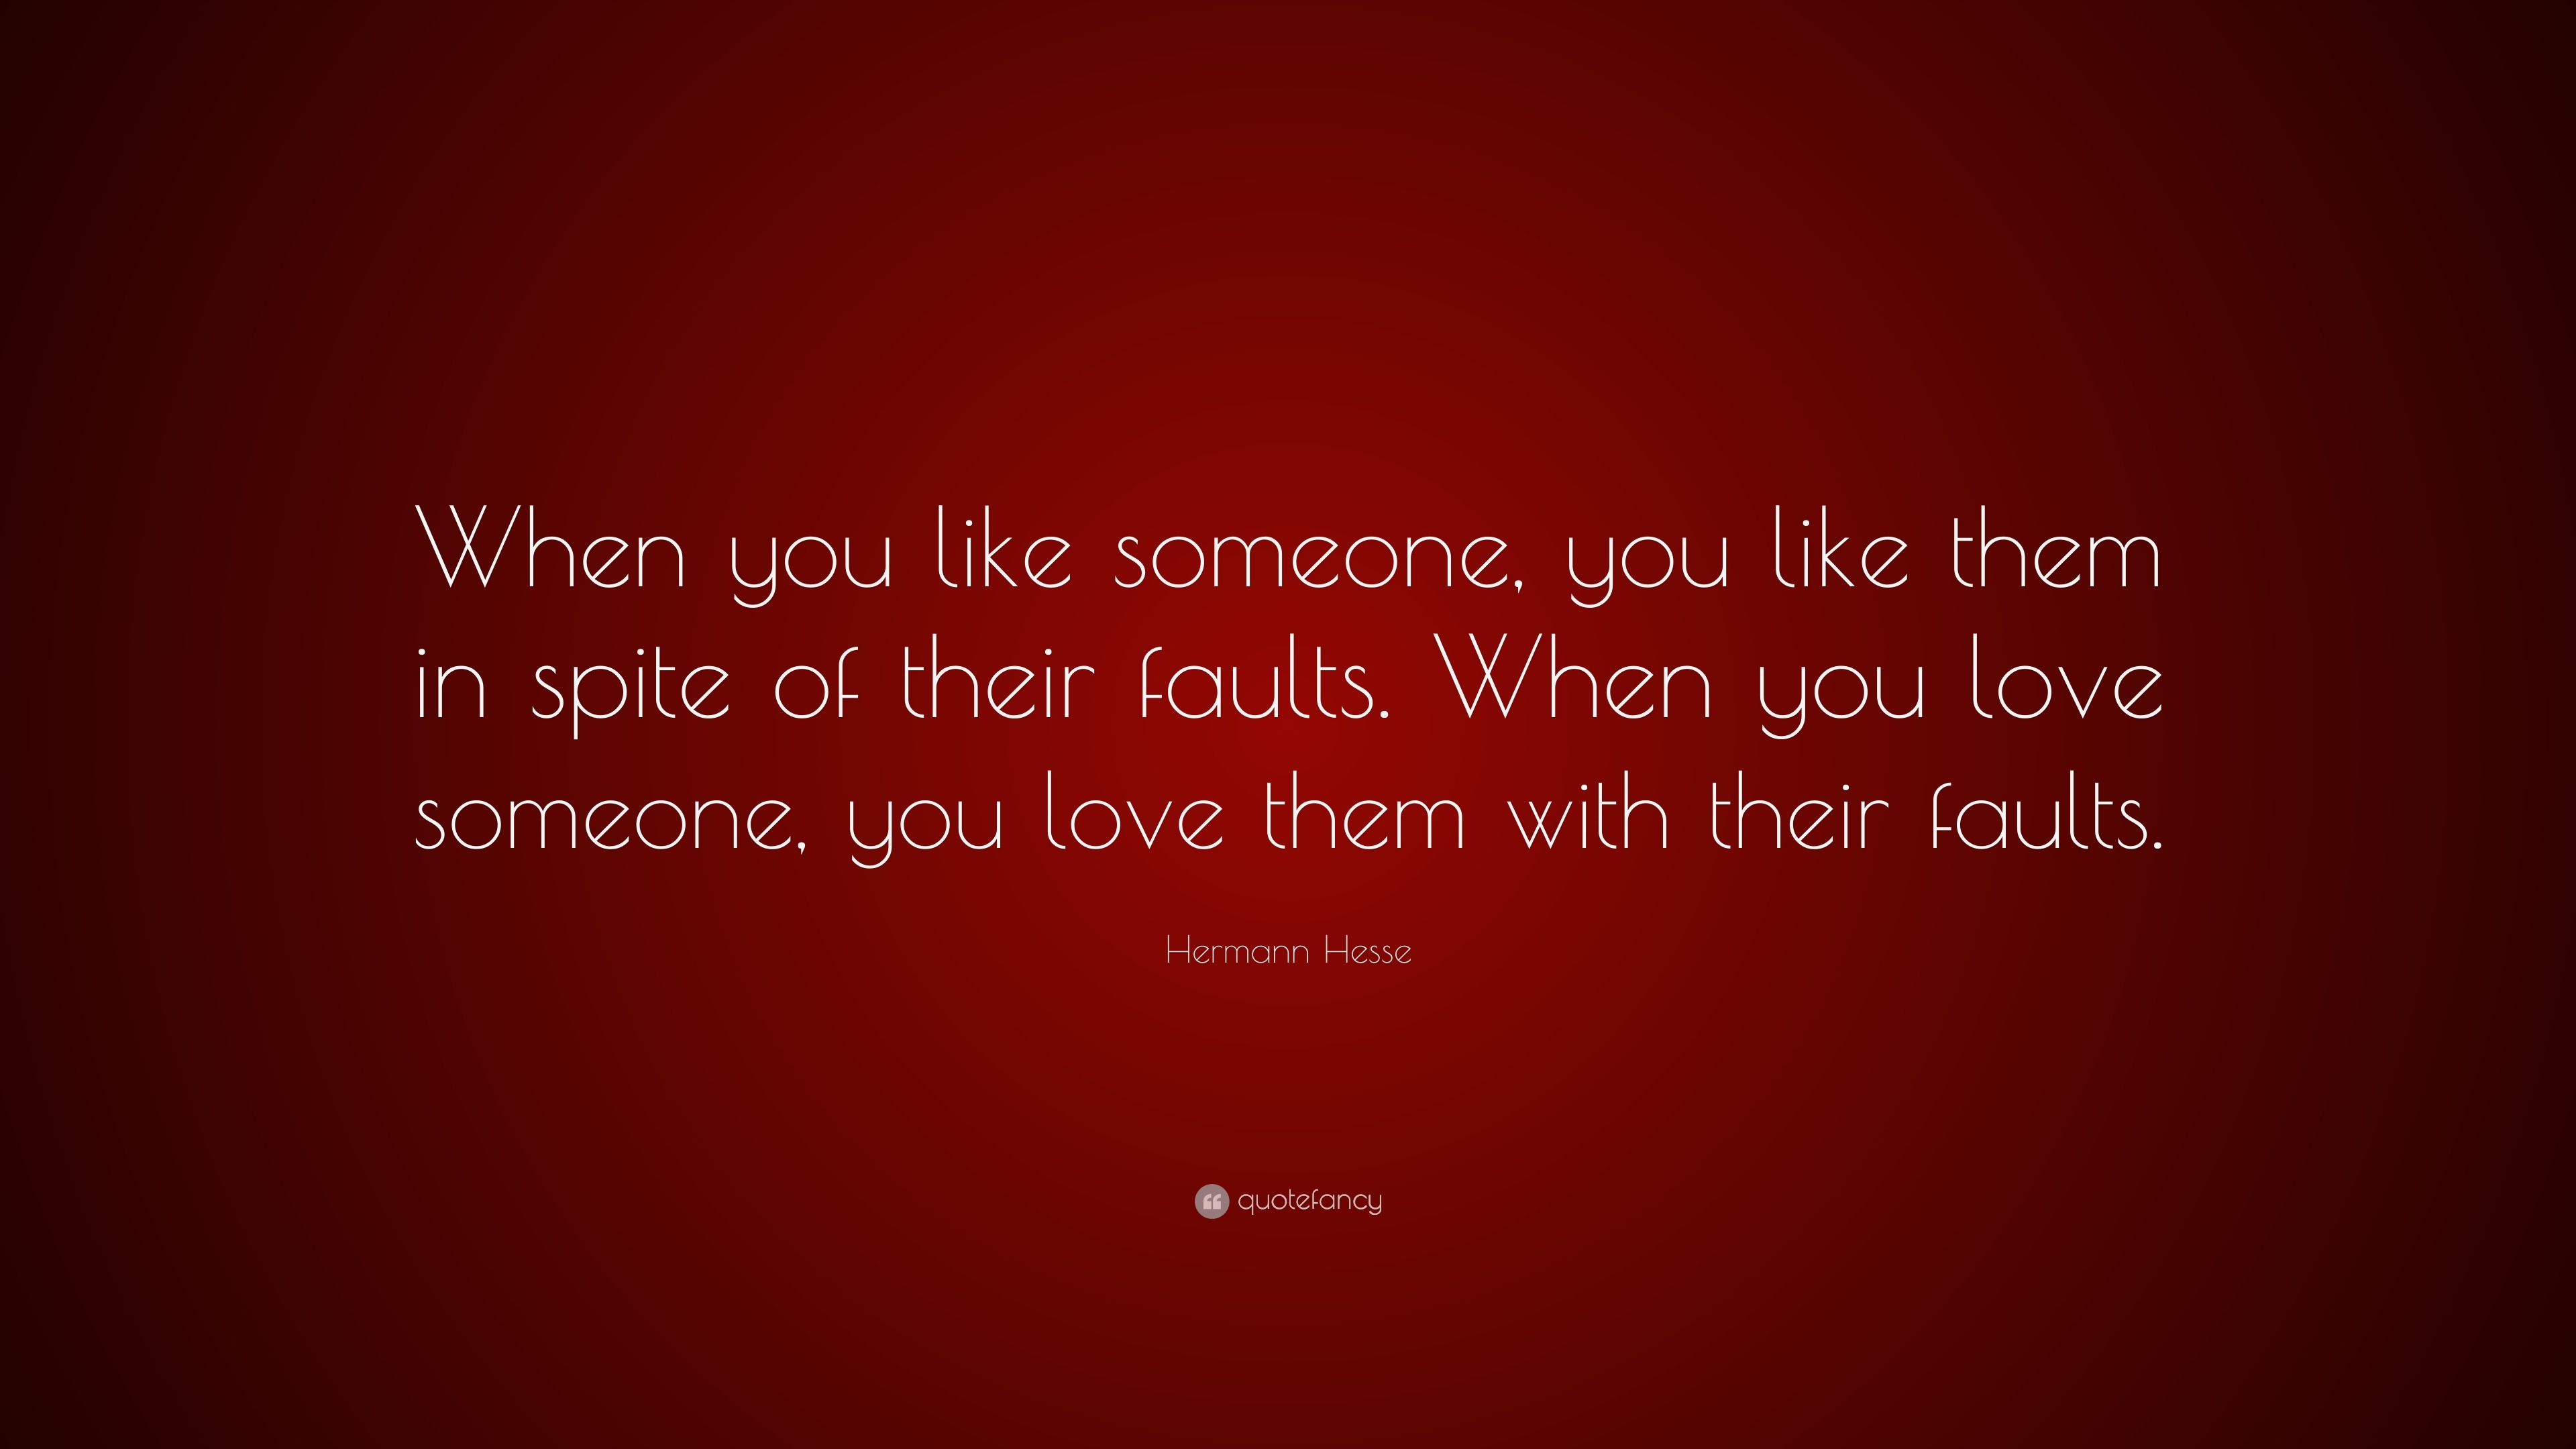 Hermann Hesse Quote “When you like someone you like them in spite of